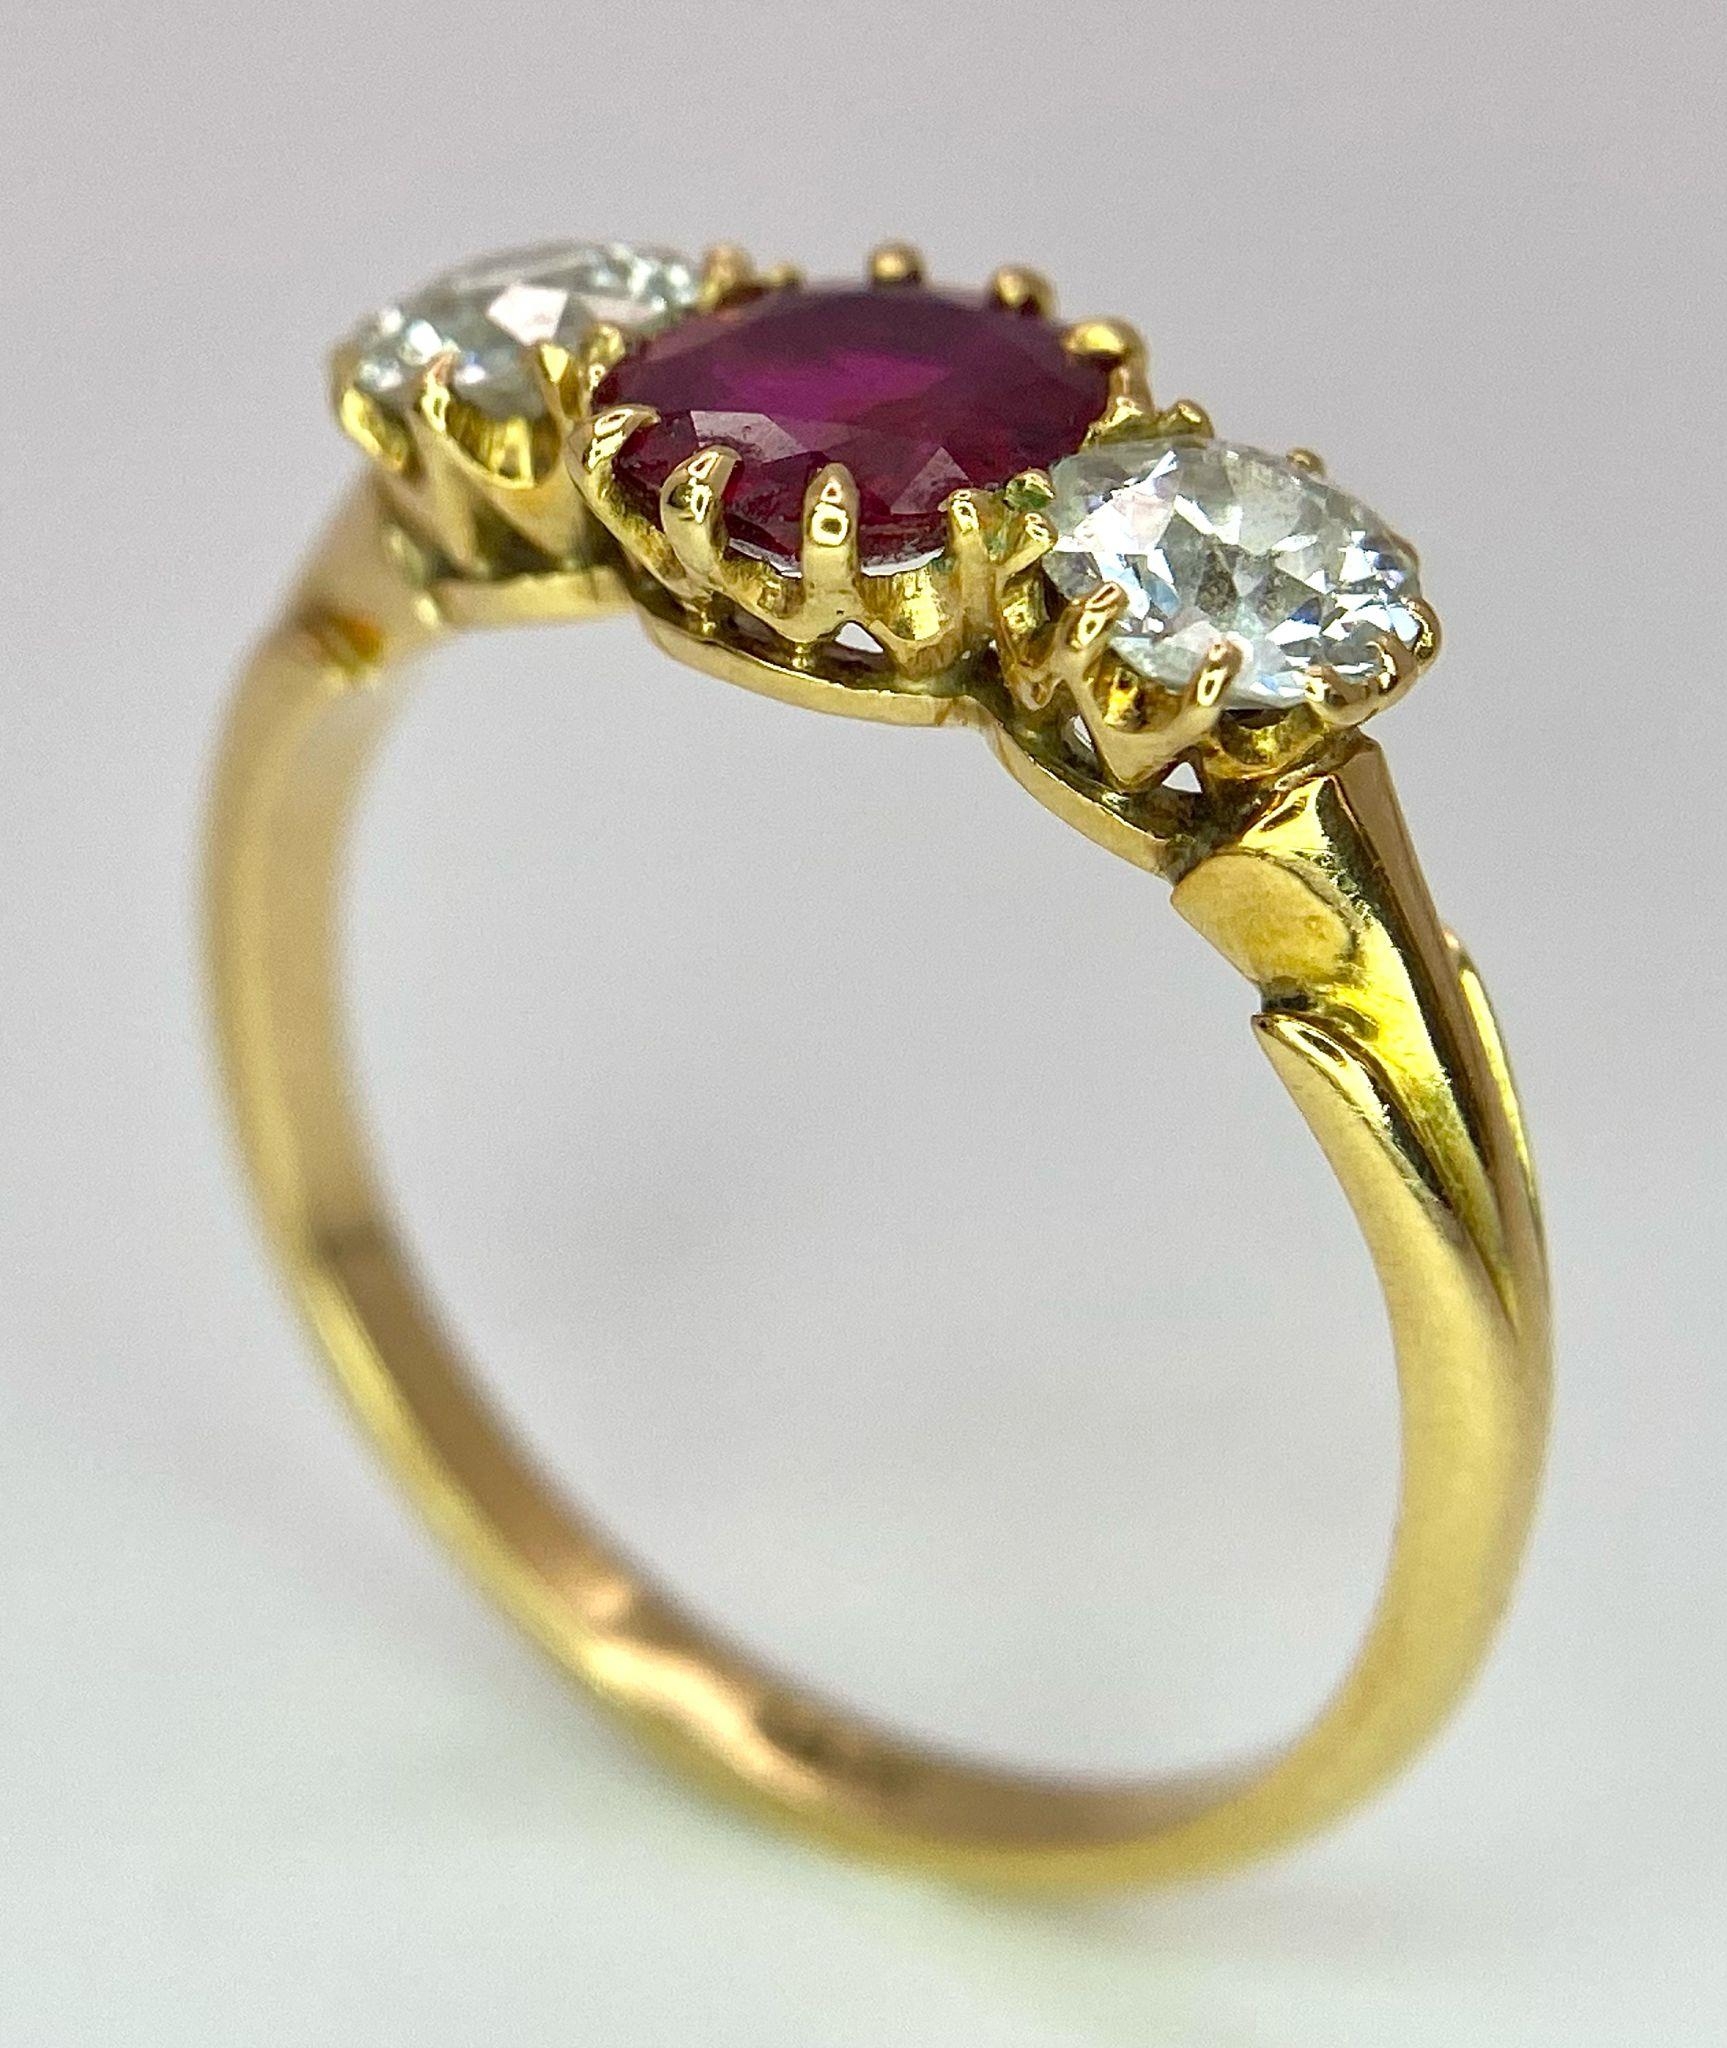 A Mesmerising 18K Yellow Gold, Ruby and Diamond Ring. A deep red oval cut ruby sits central - Image 5 of 9